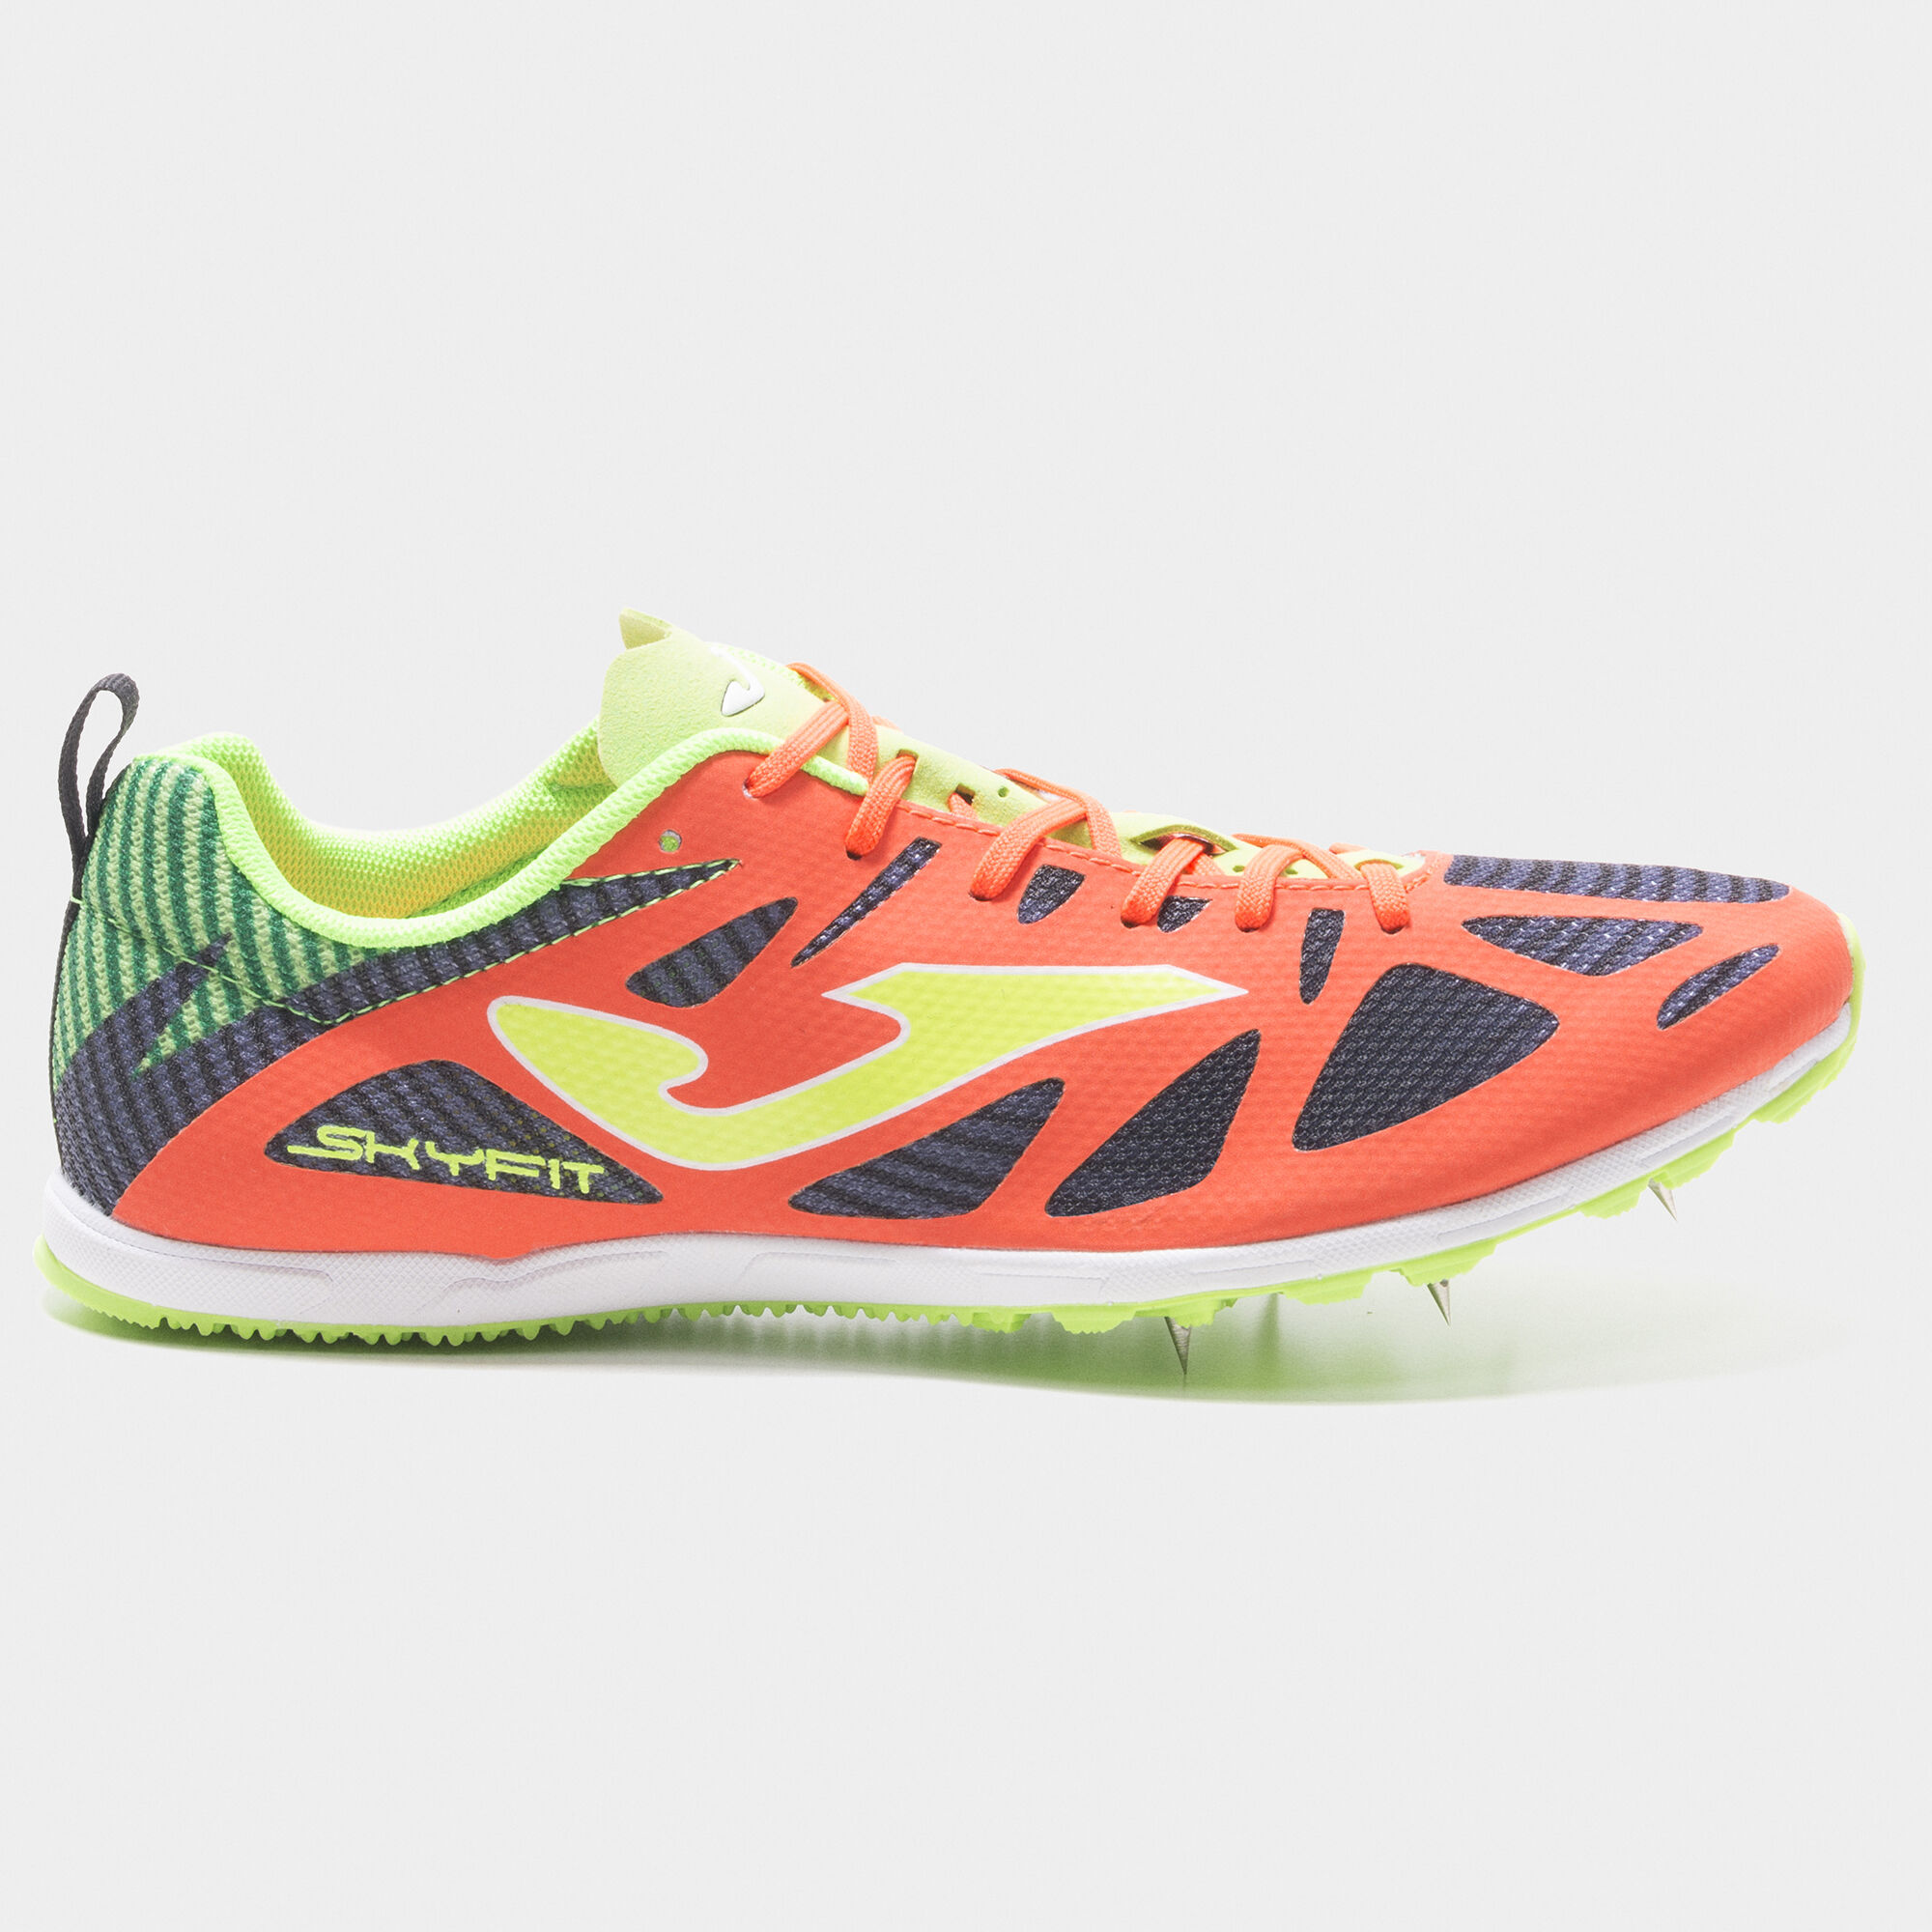 CHAUSSURES RUNNING 6728 SPIKES POINTES UNISEXE CORAIL